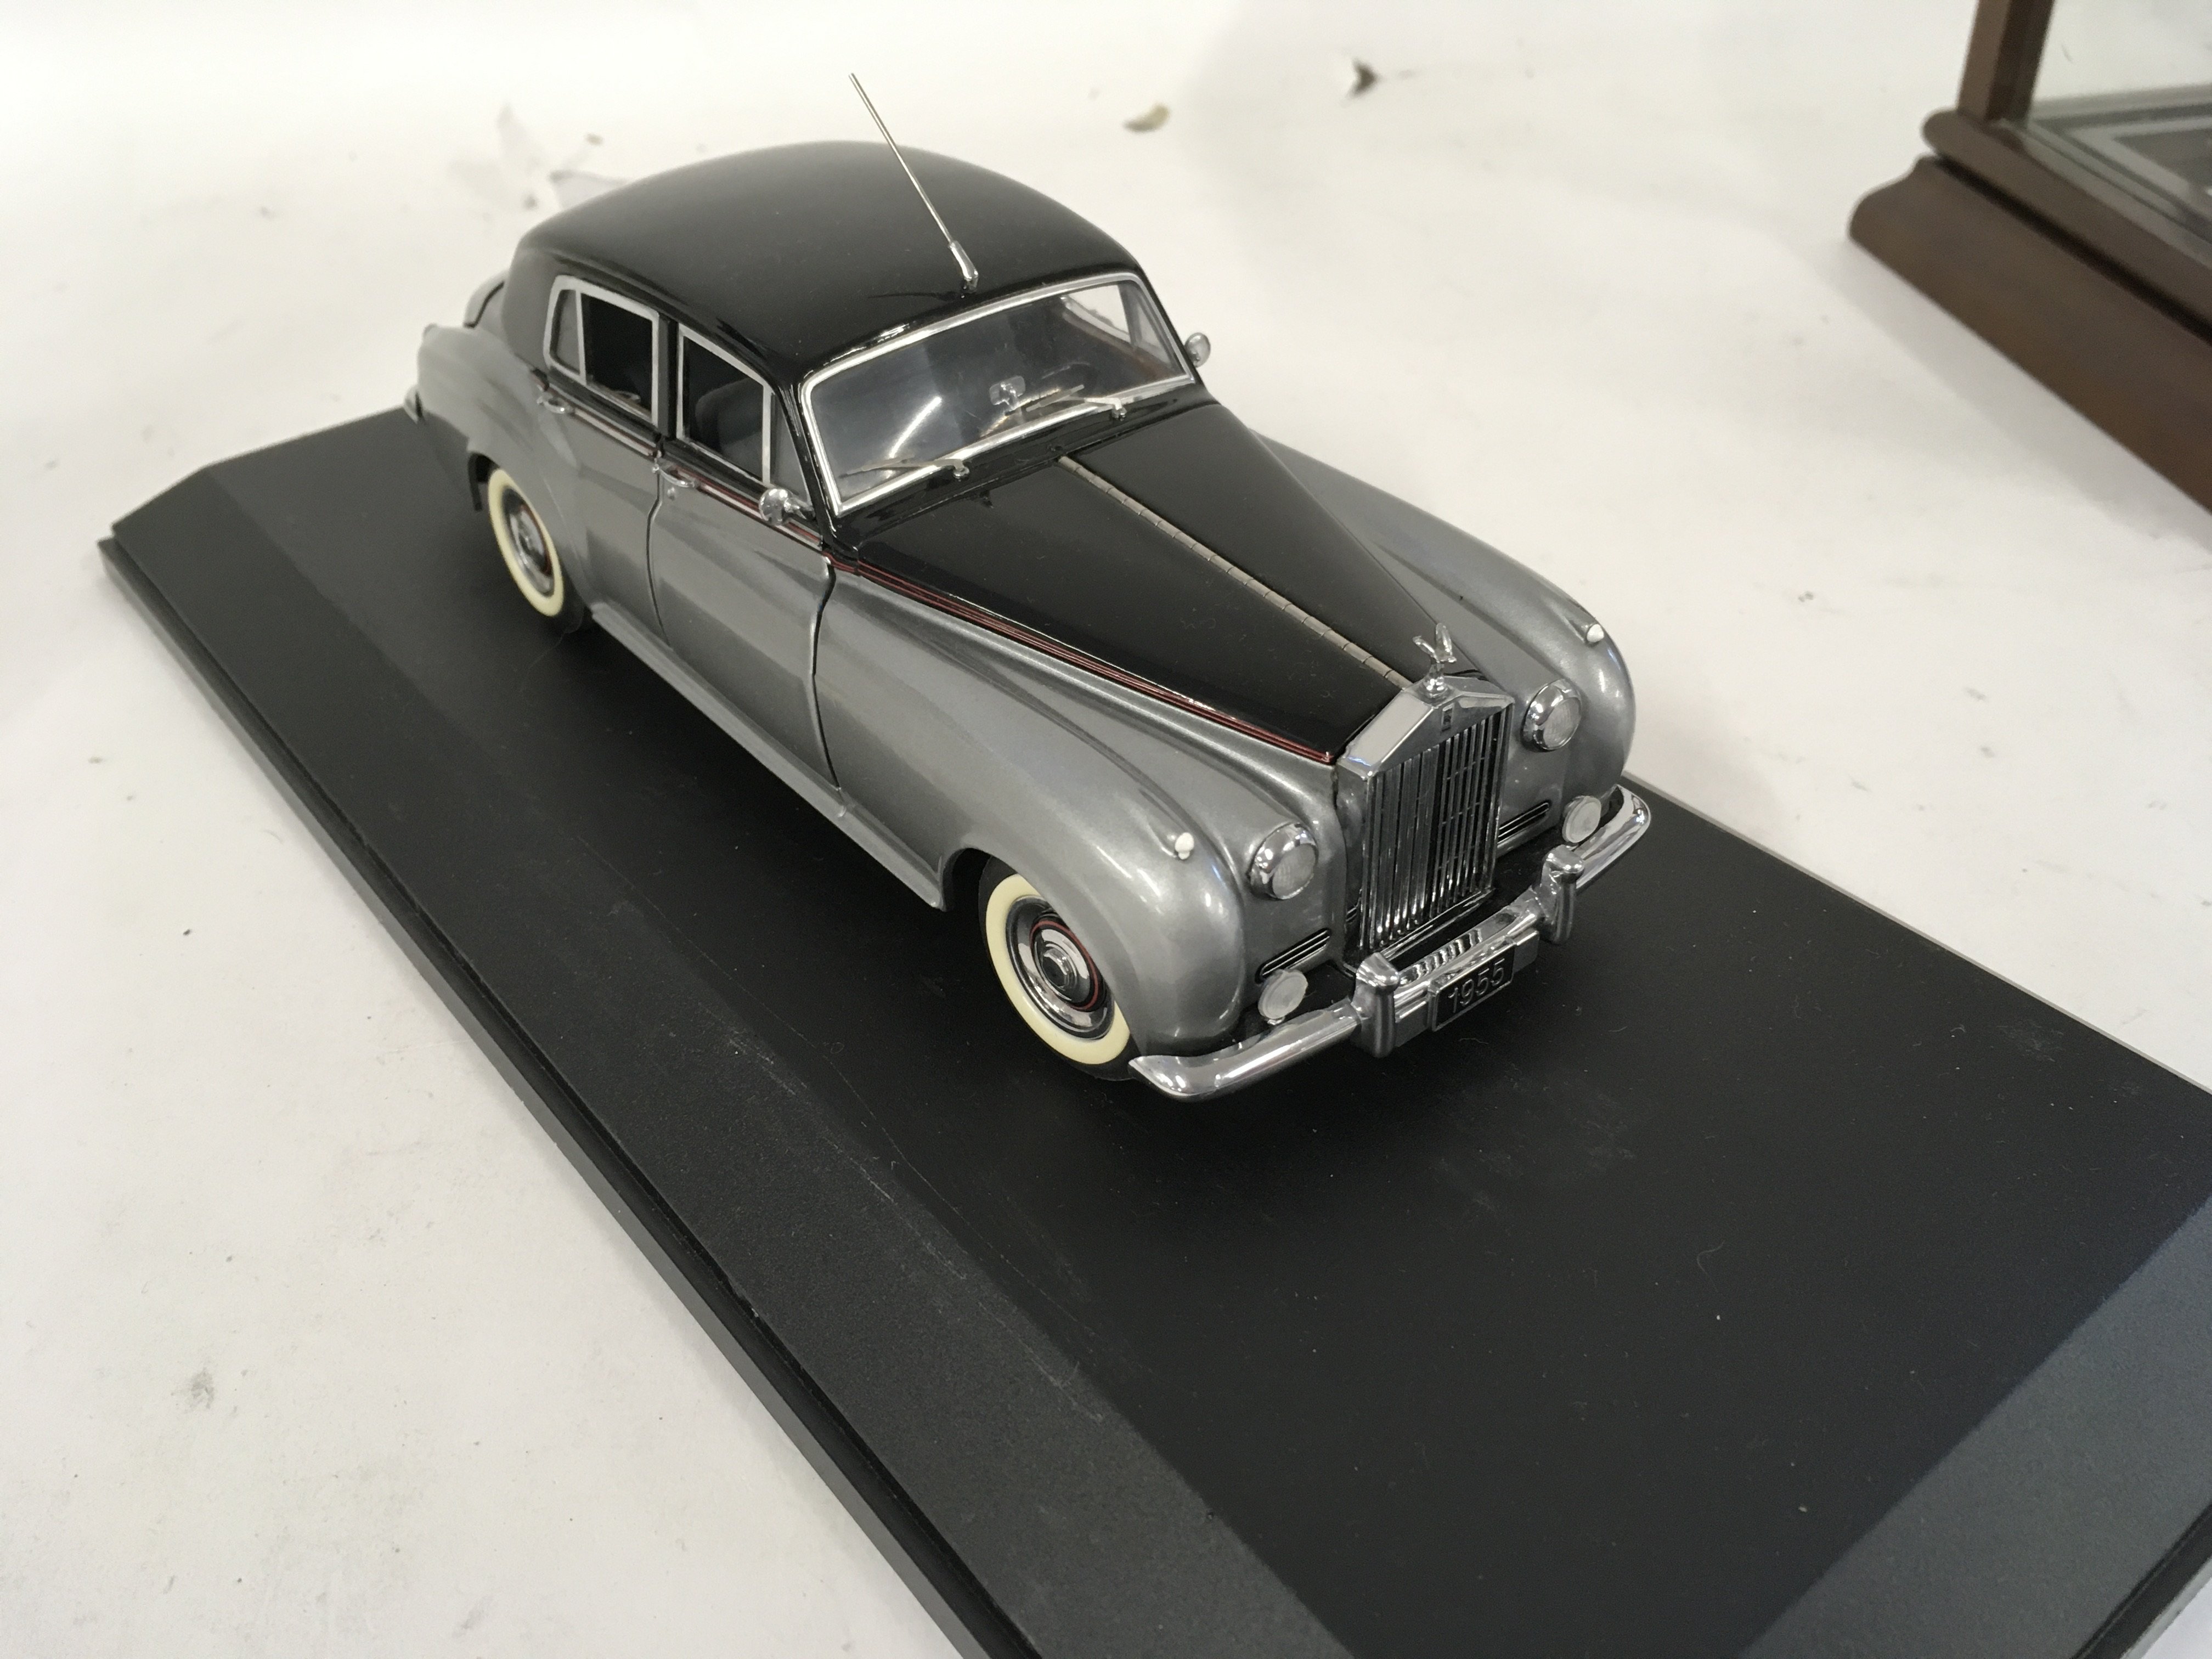 Three precision model cars by Franklin Mint both in presentation cases. Cars are 2 x RollsRoyce - Image 4 of 10